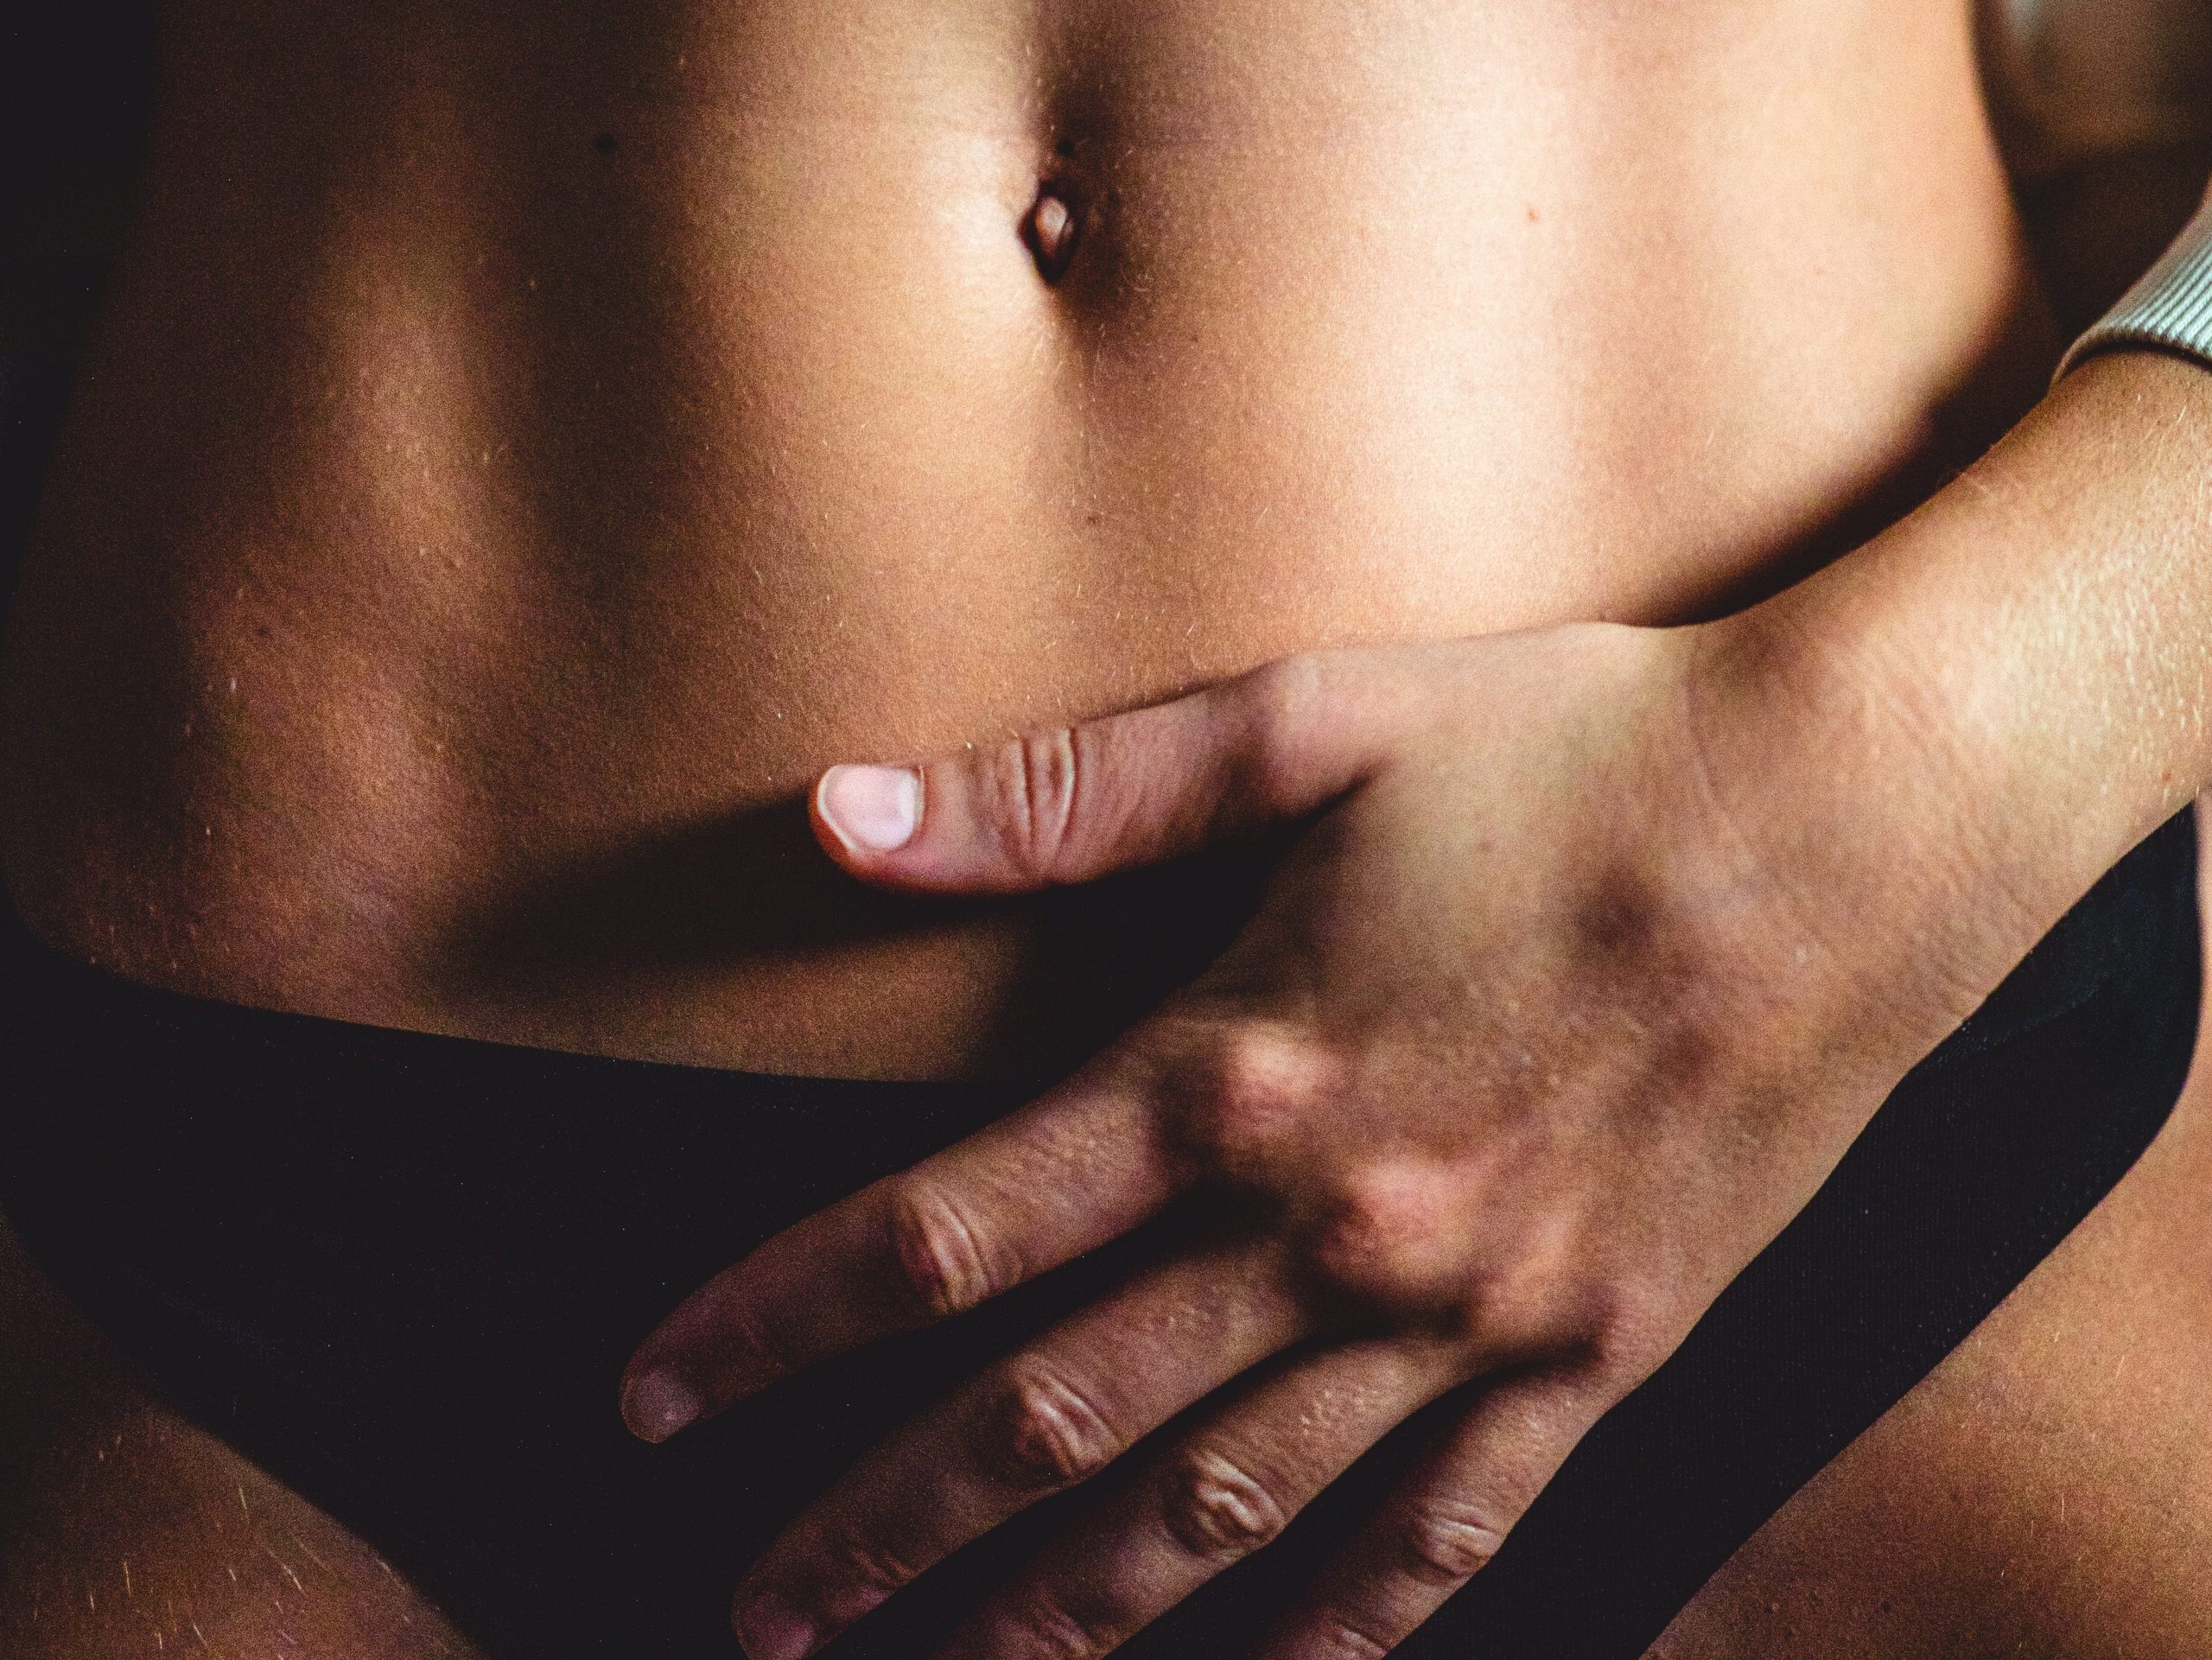 Close-up of a person's abdomen with their hand over it, appearing to be rubbing it.